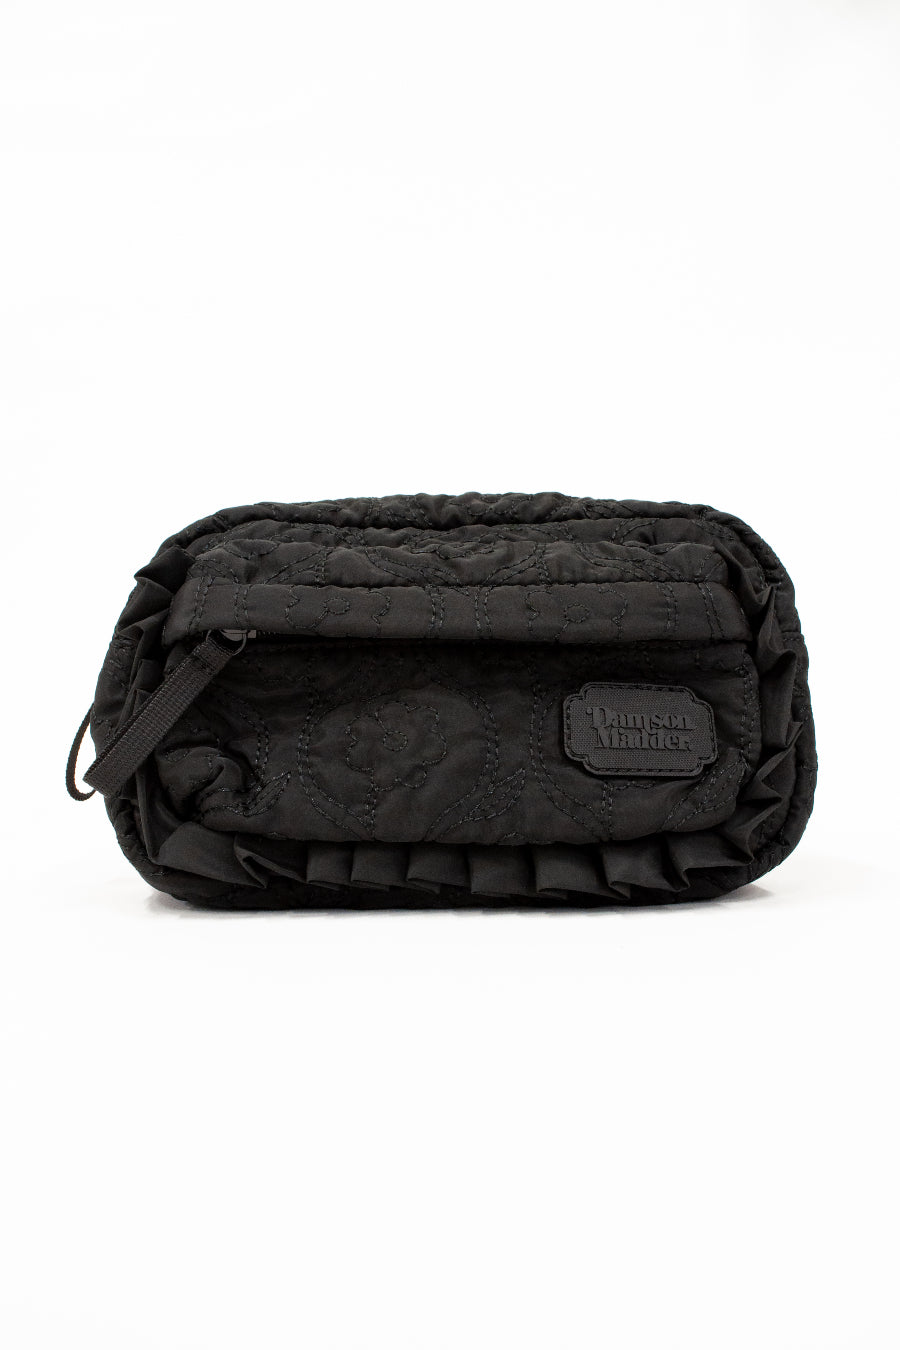 FRILL BUMBAG IN BLACK FLORAL STITCH